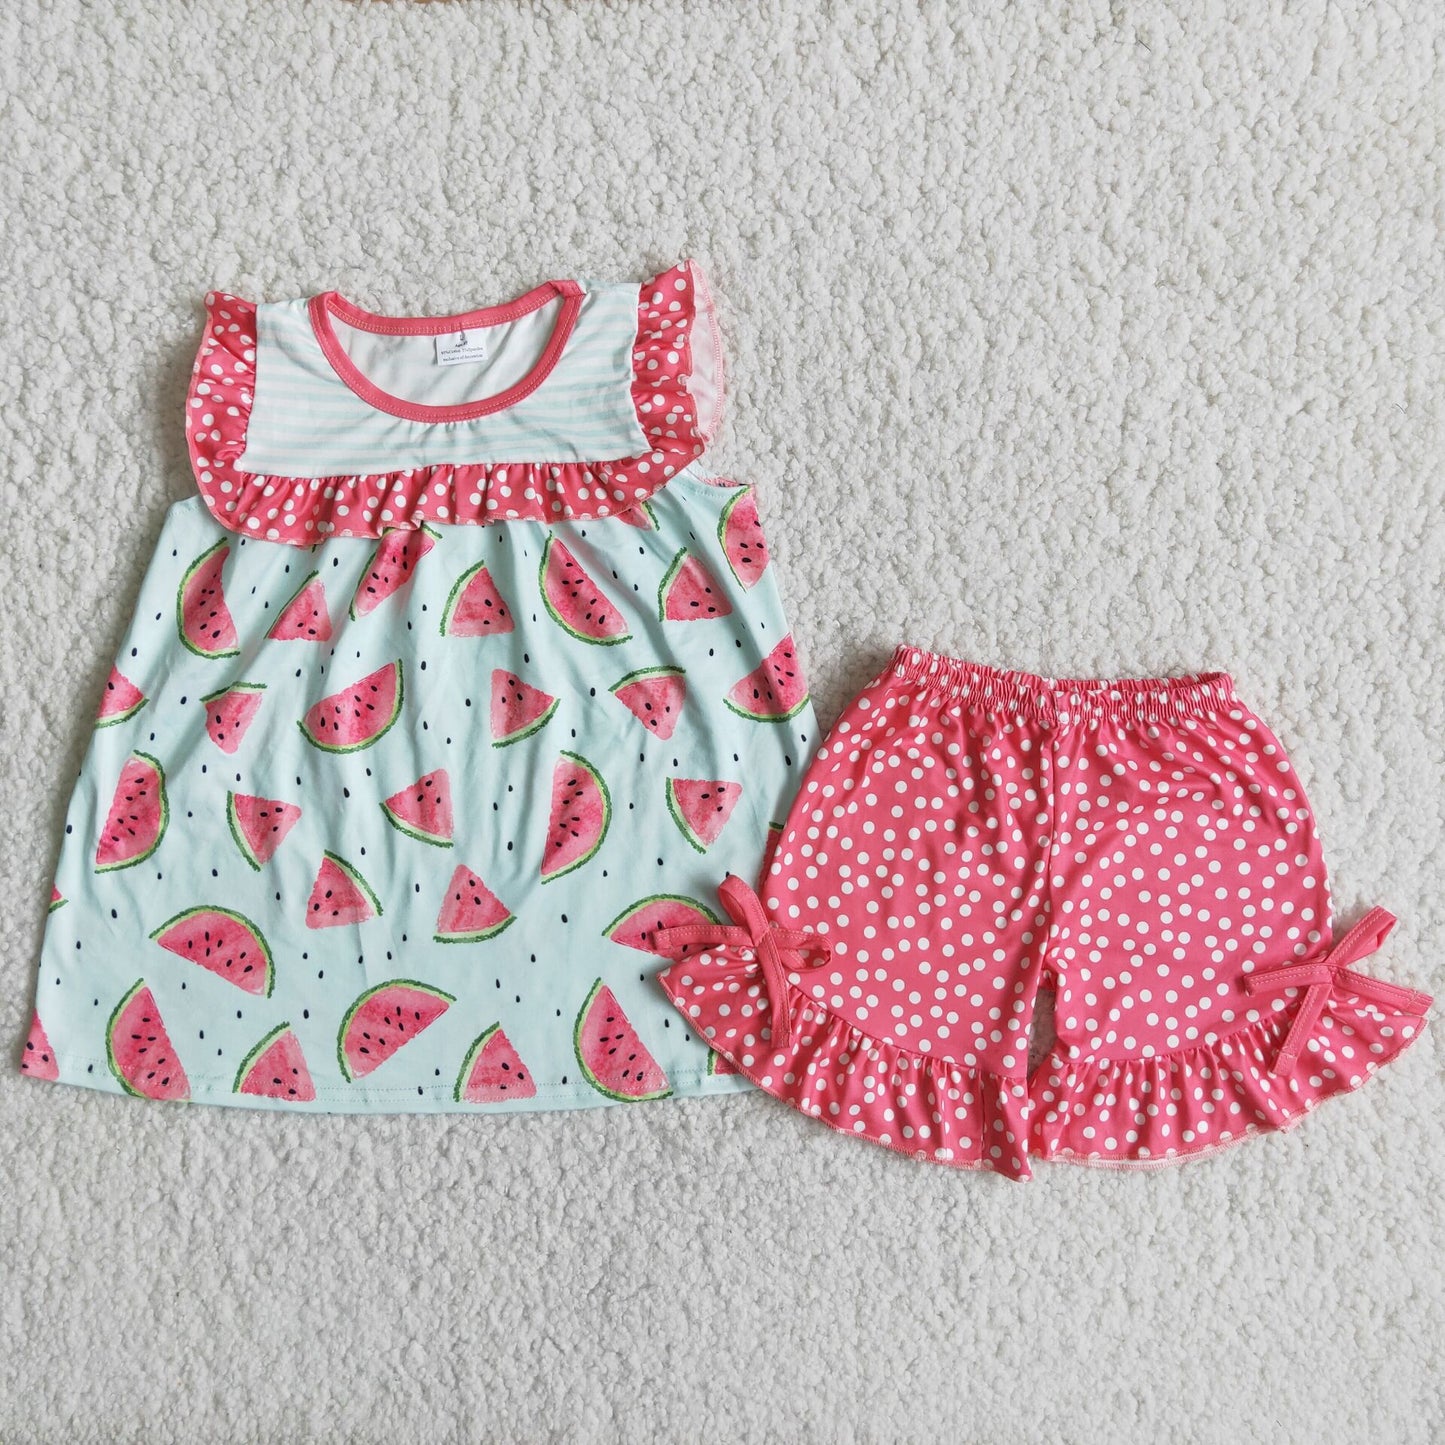 girl’s watermelon shorts set outfit